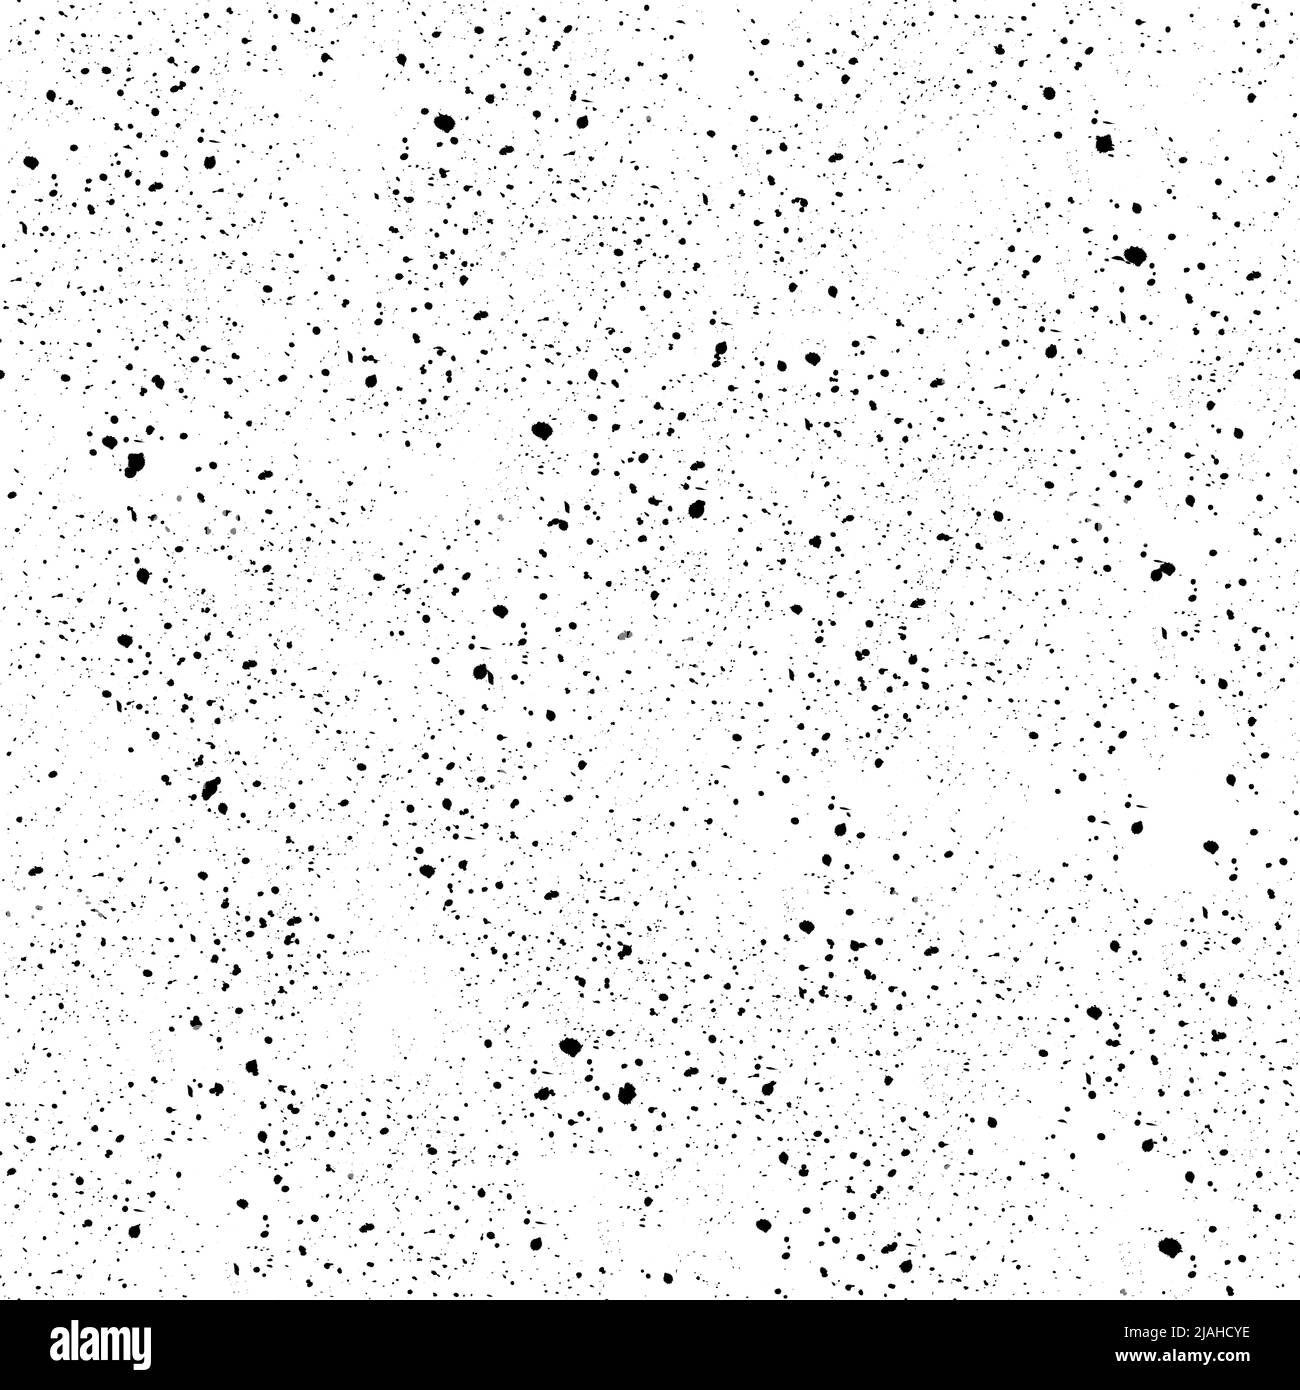 Black speckle texture Stock Vector Images - Alamy